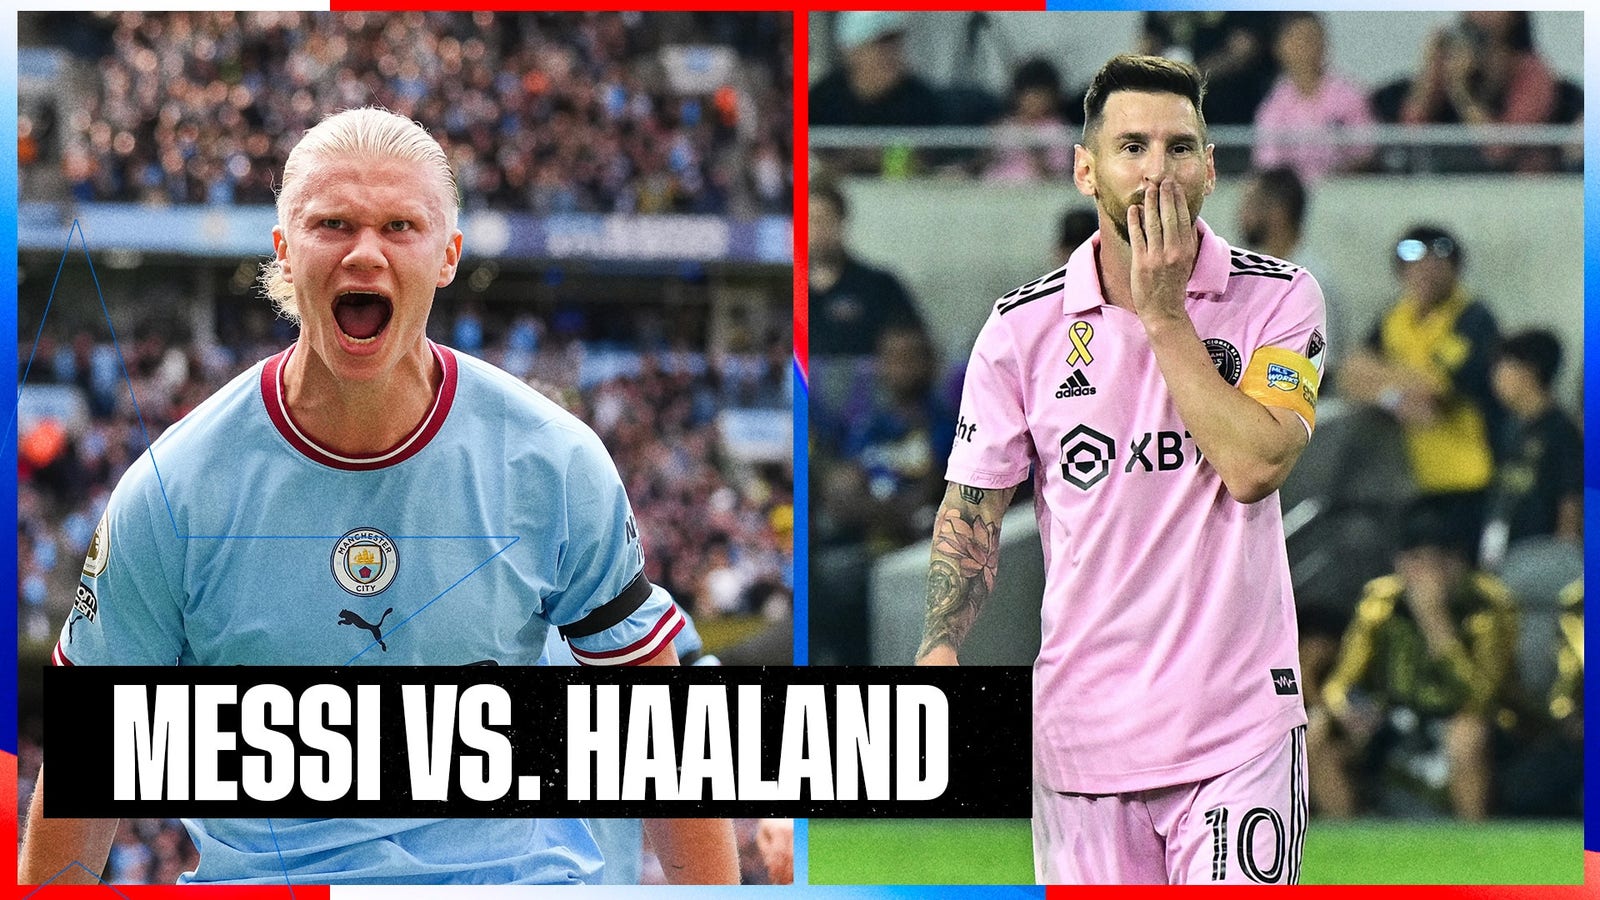 Messi vs. Haaland: Who would you rather have?